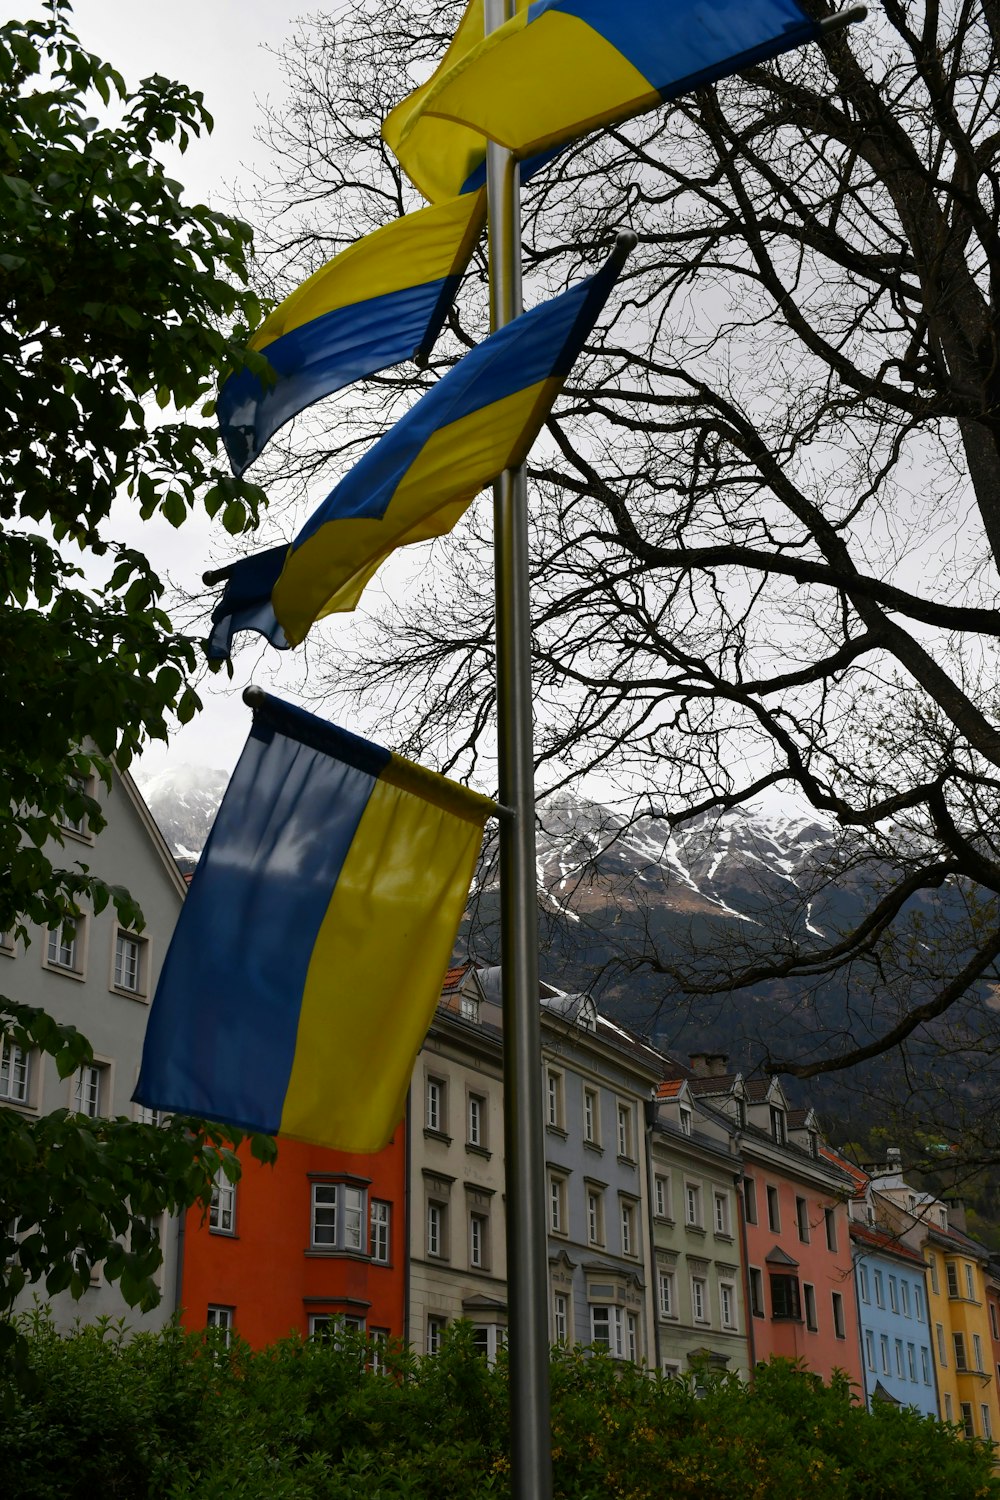 a group of flags on a pole